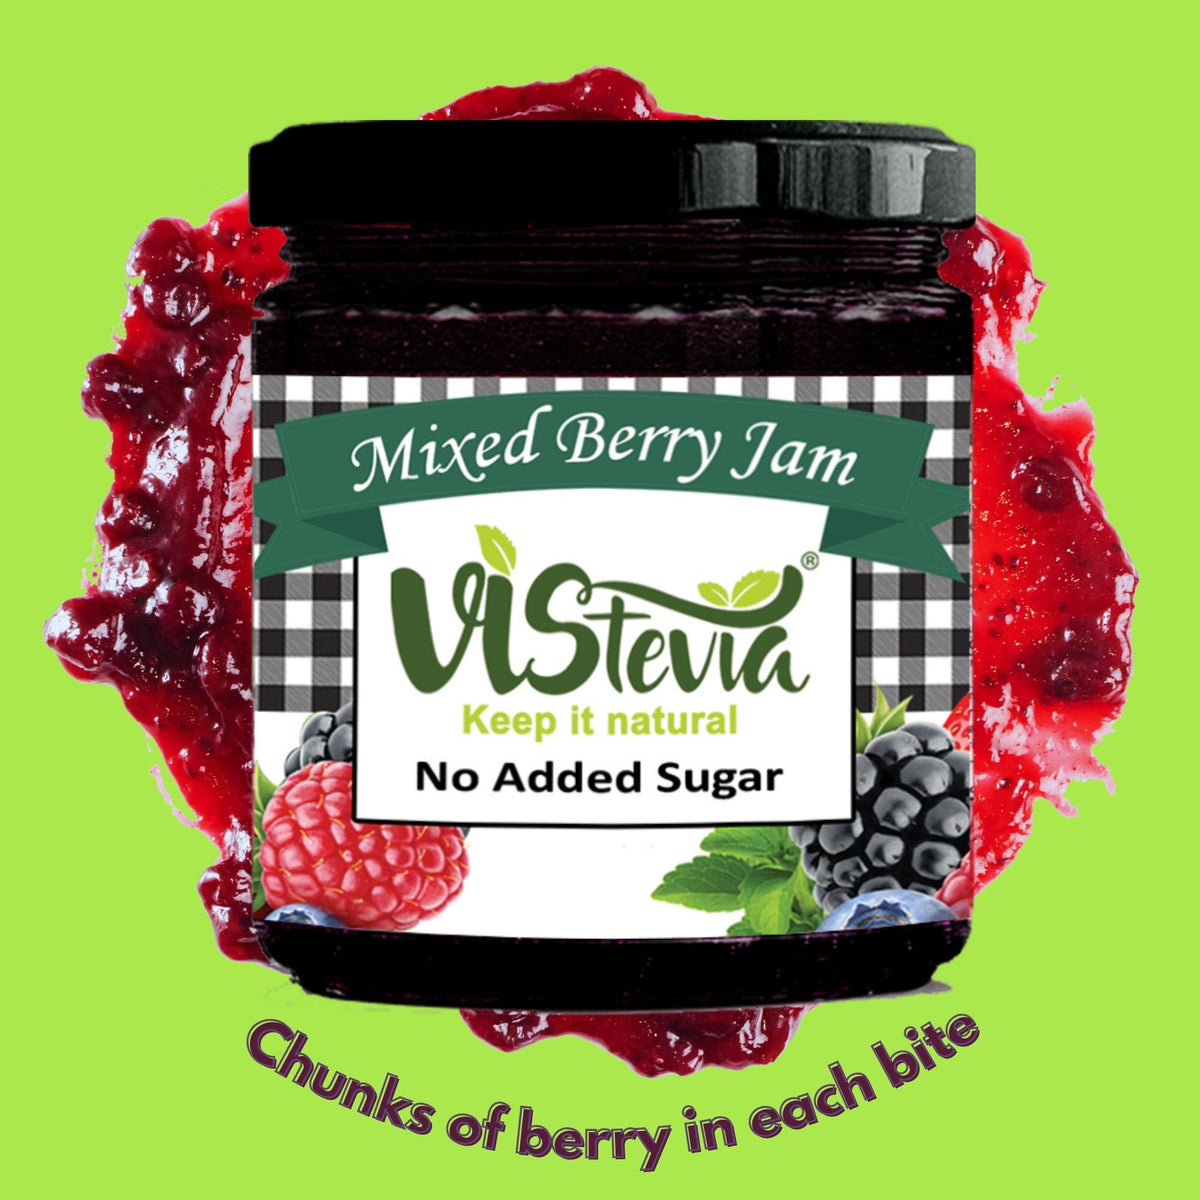 Vistevia Sugar Free Mixed Berry Jam, Diabetic and Keto Friendly - Sweetened Naturally with Stevia, More Than 60% Berries Content - Tastes Delicious - Pack of 1 (220G)